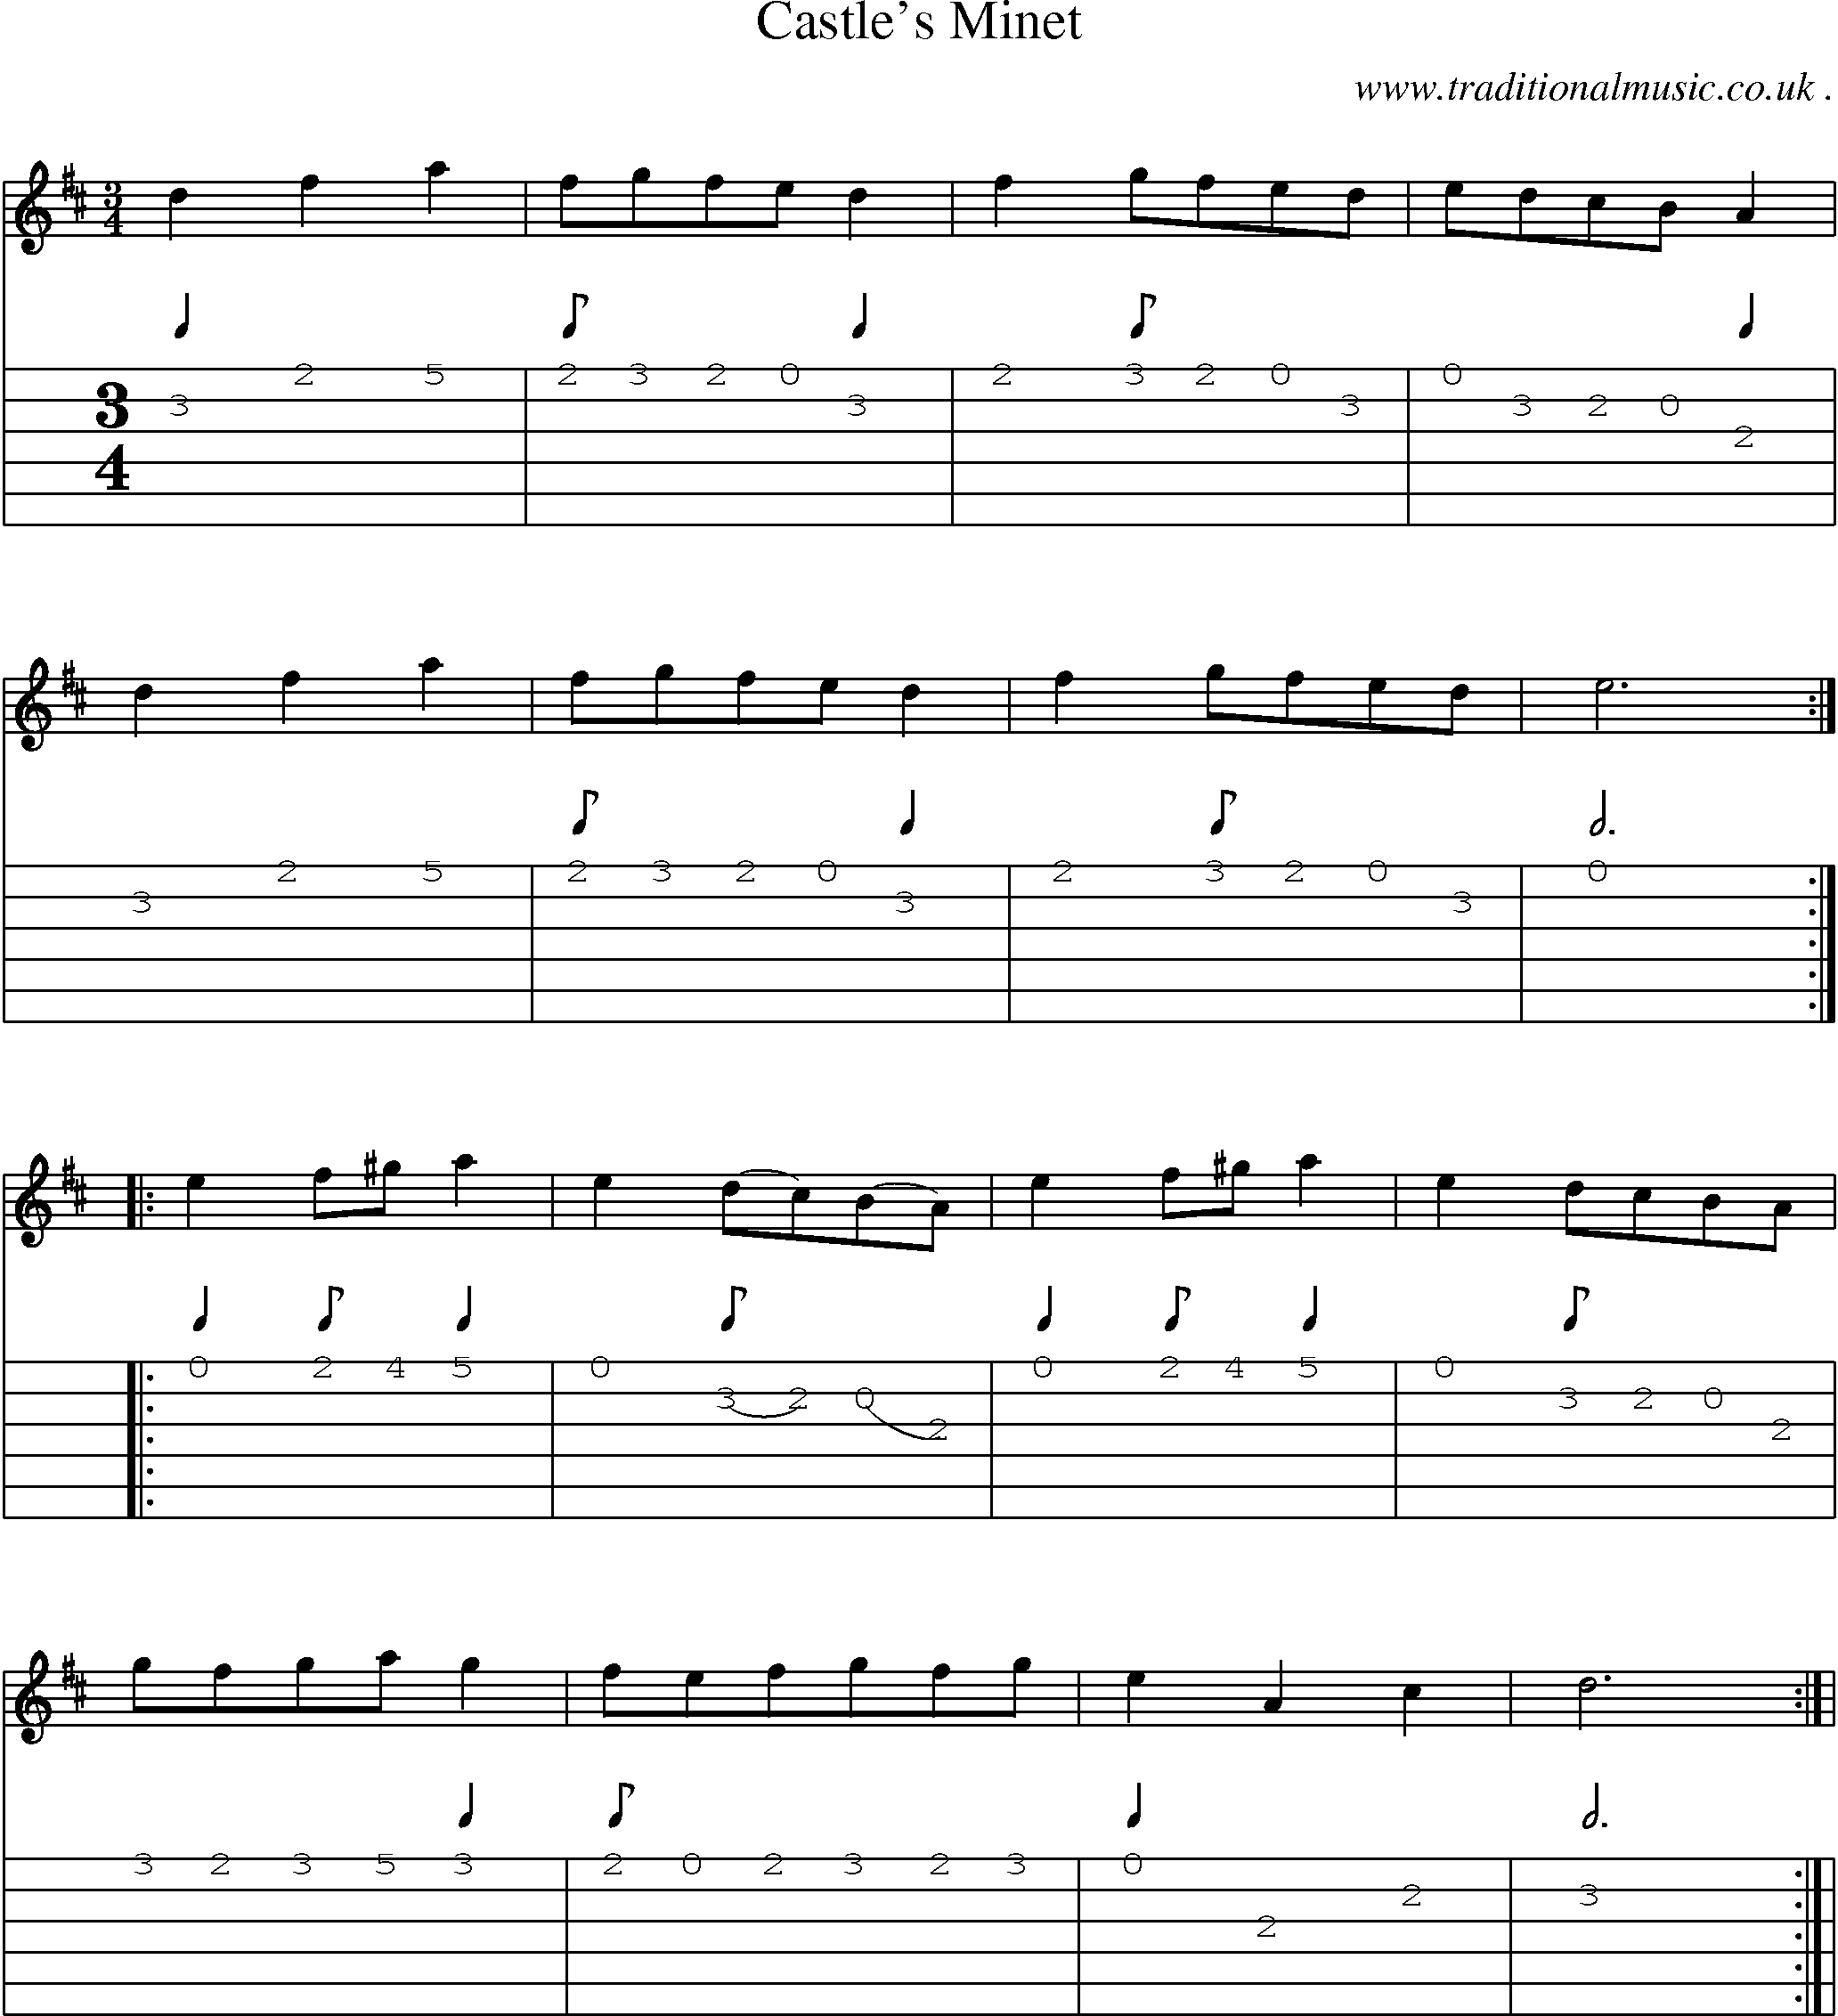 Sheet-Music and Guitar Tabs for Castles Minet